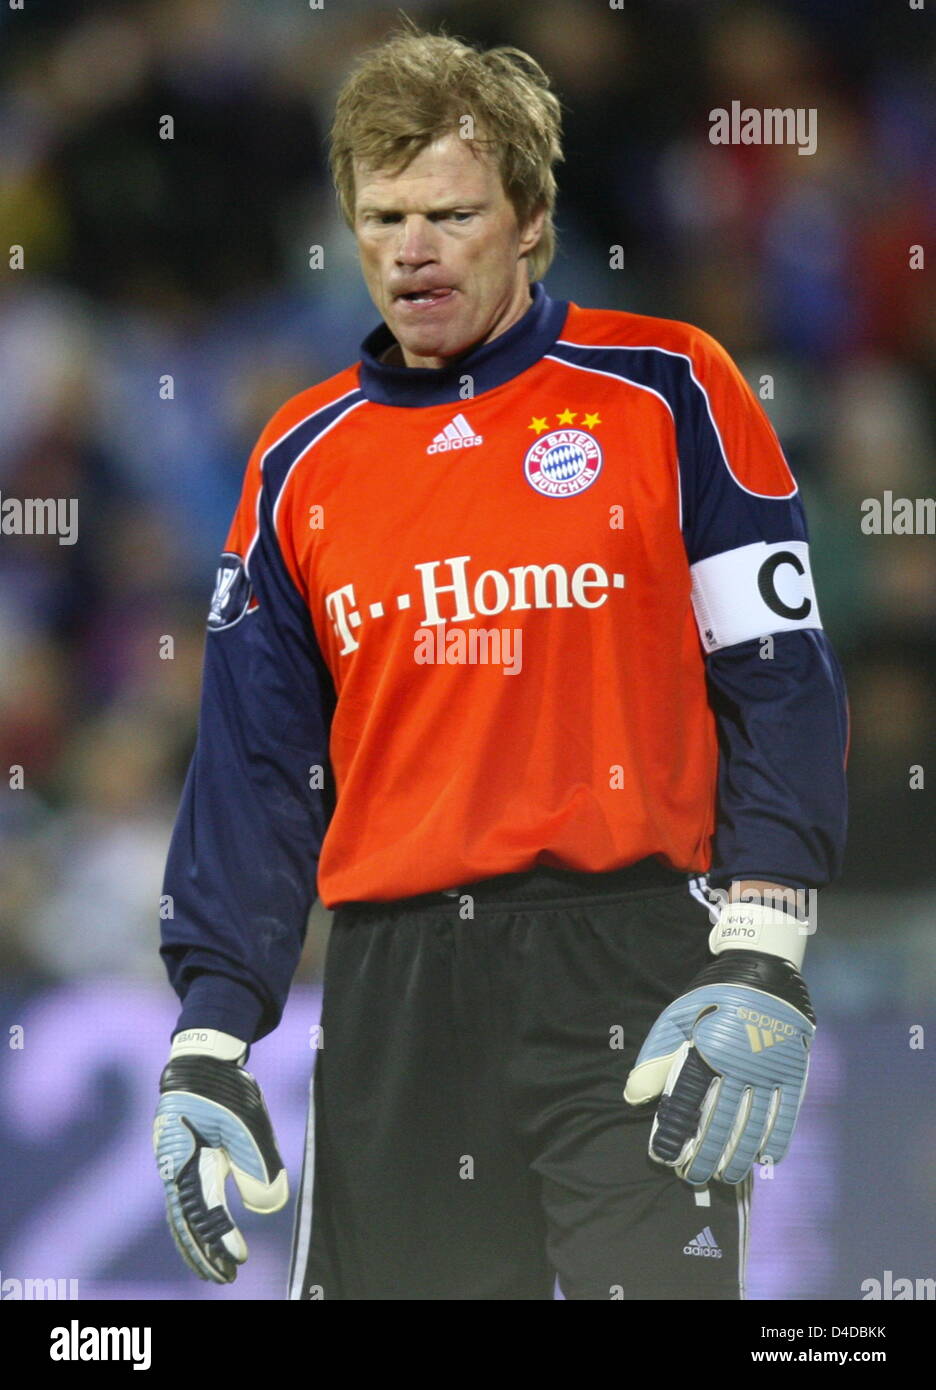 Munich's goalie Oliver Kahn looks belligerent in the UEFA Cup quarter-finals 2nd leg Getafe CF v FC Bayern Munich at Coliseum Alfonso Perez stadium in Madrid, Spain, 10 April 2008. The match ended in a 3-3 draw a.e.t. and 4-4 on aggregate with a weak Munich squad moving up to semi-finals due to having scored more away goals. Photo: Matthias Schrader Stock Photo